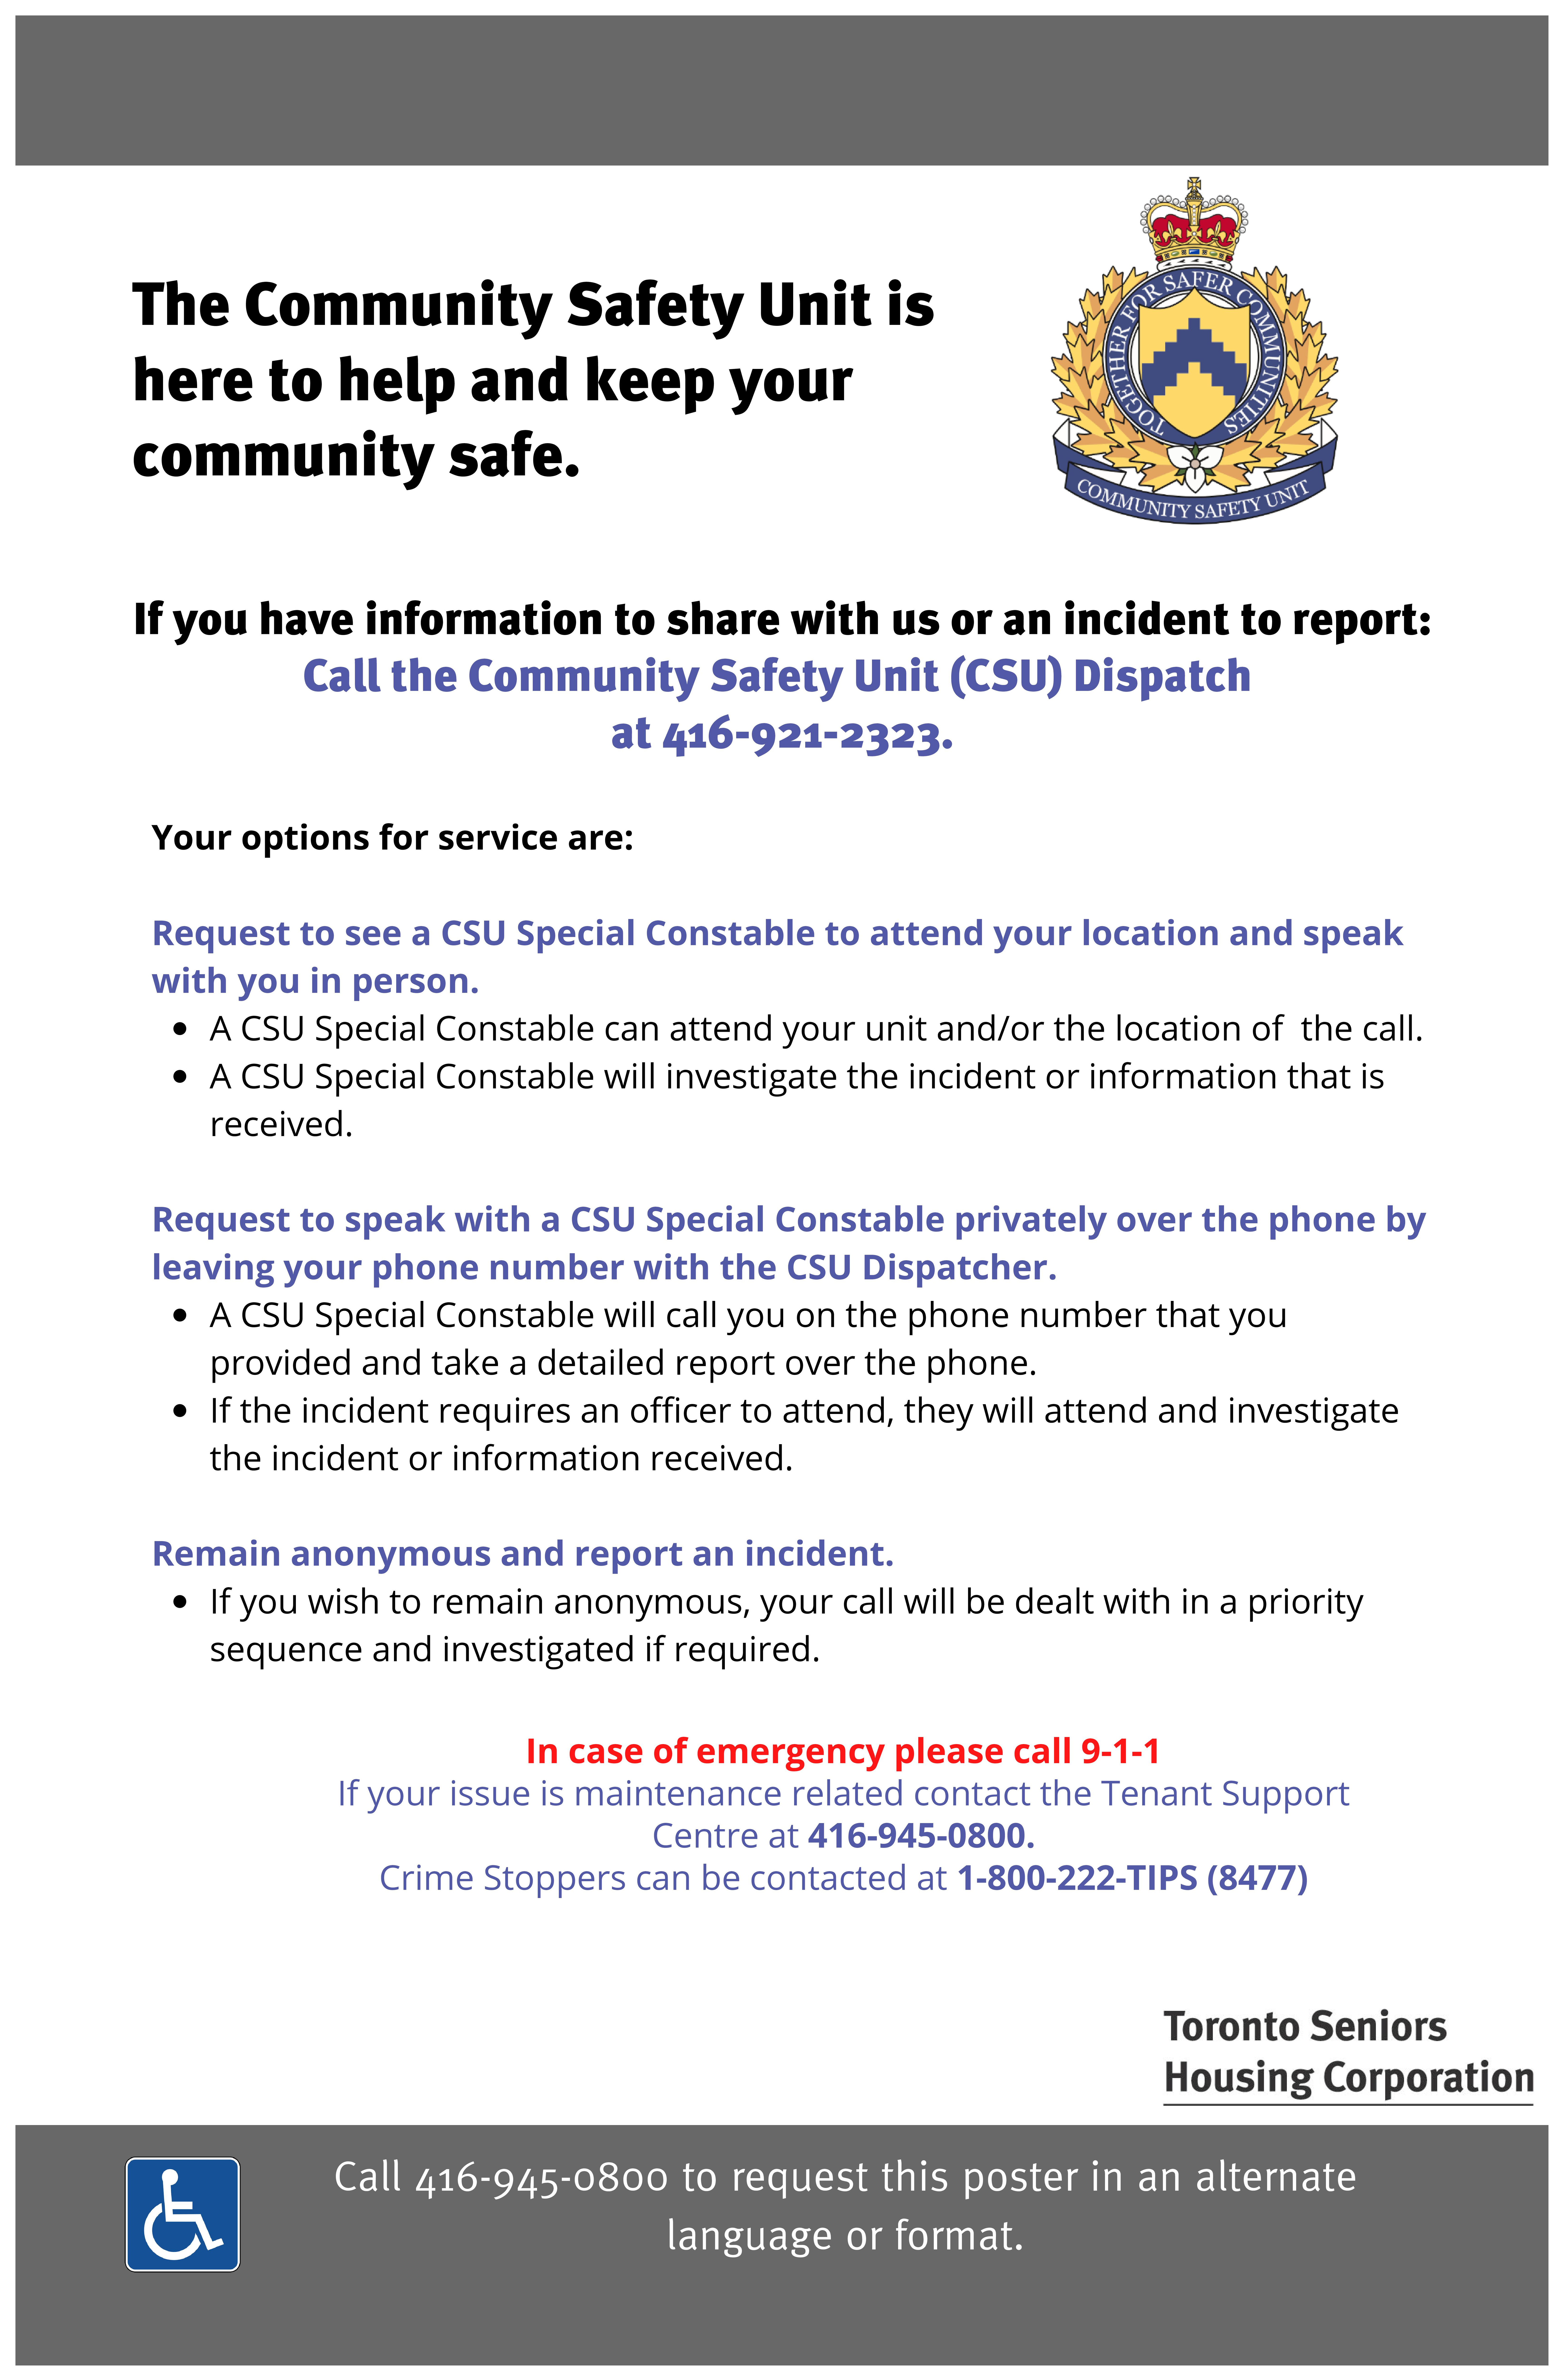 A poster that describes the Community Safety Unit. The full text of this poster is immediately below the image on this page.